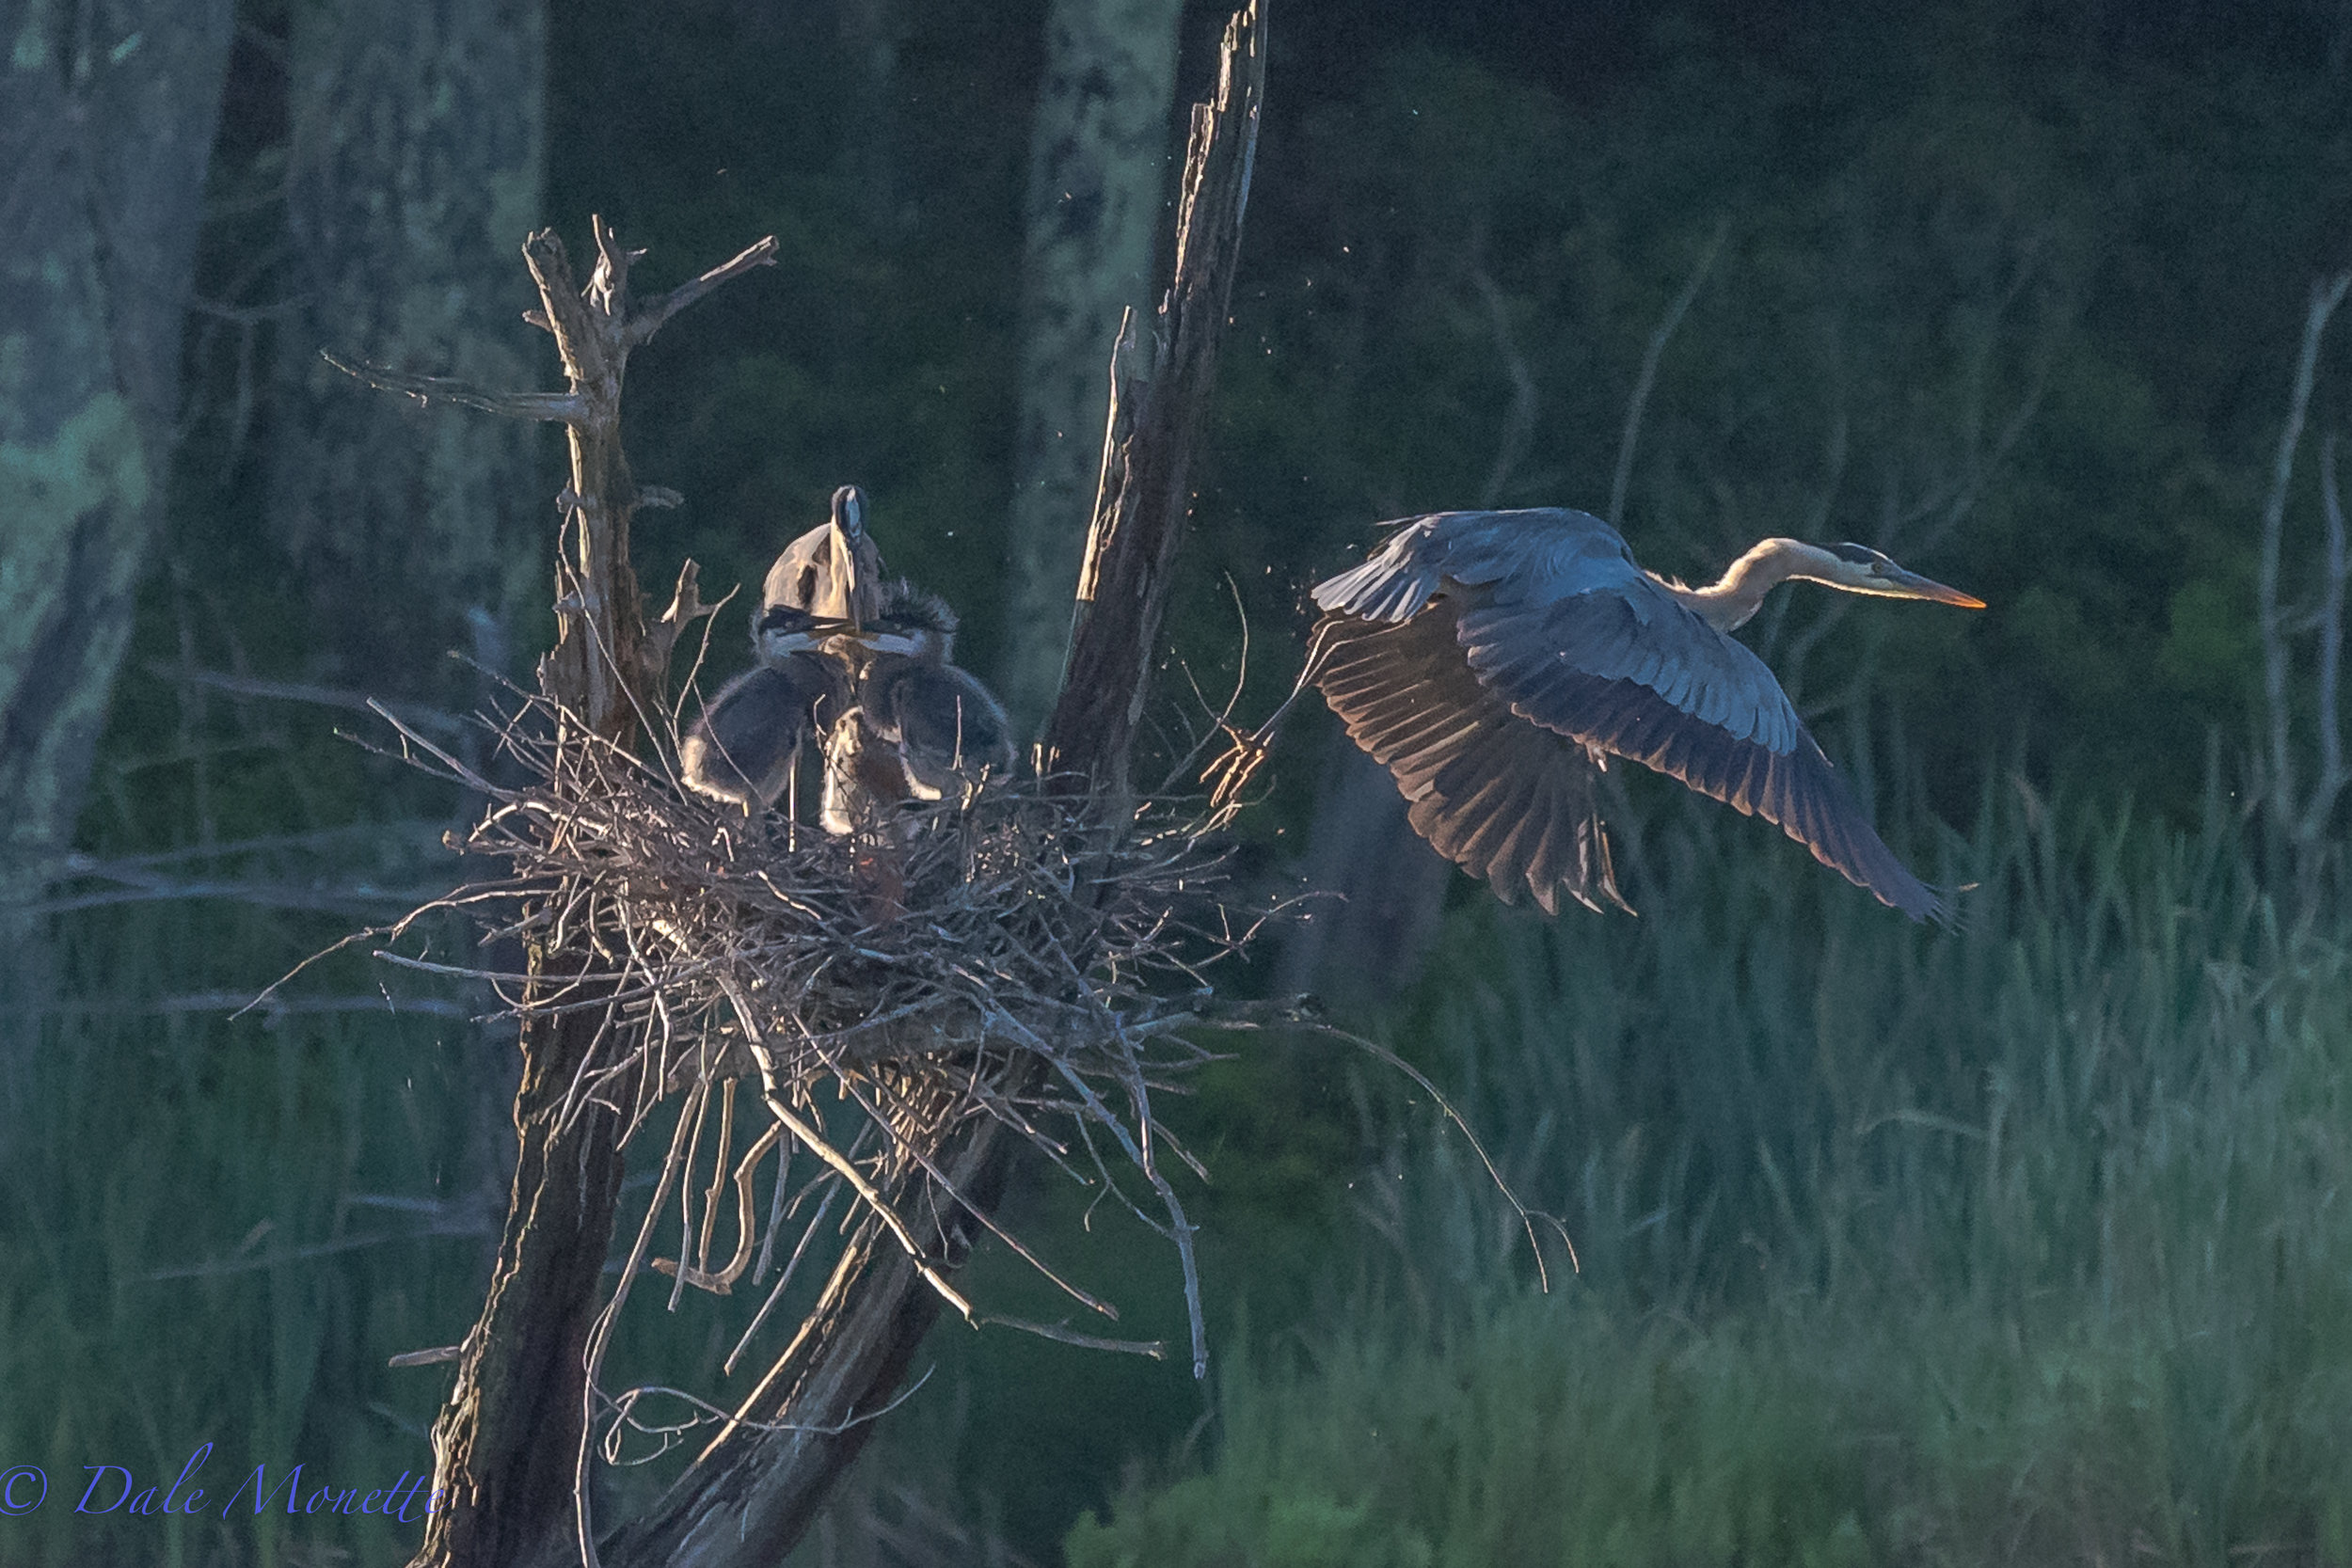   And as soon as dad arrives home, mom leaves as she's been sitting with the 3 great blue heron chicks all night.. "see ya later chump feed them and babysit for a while" &nbsp;7/9/17  